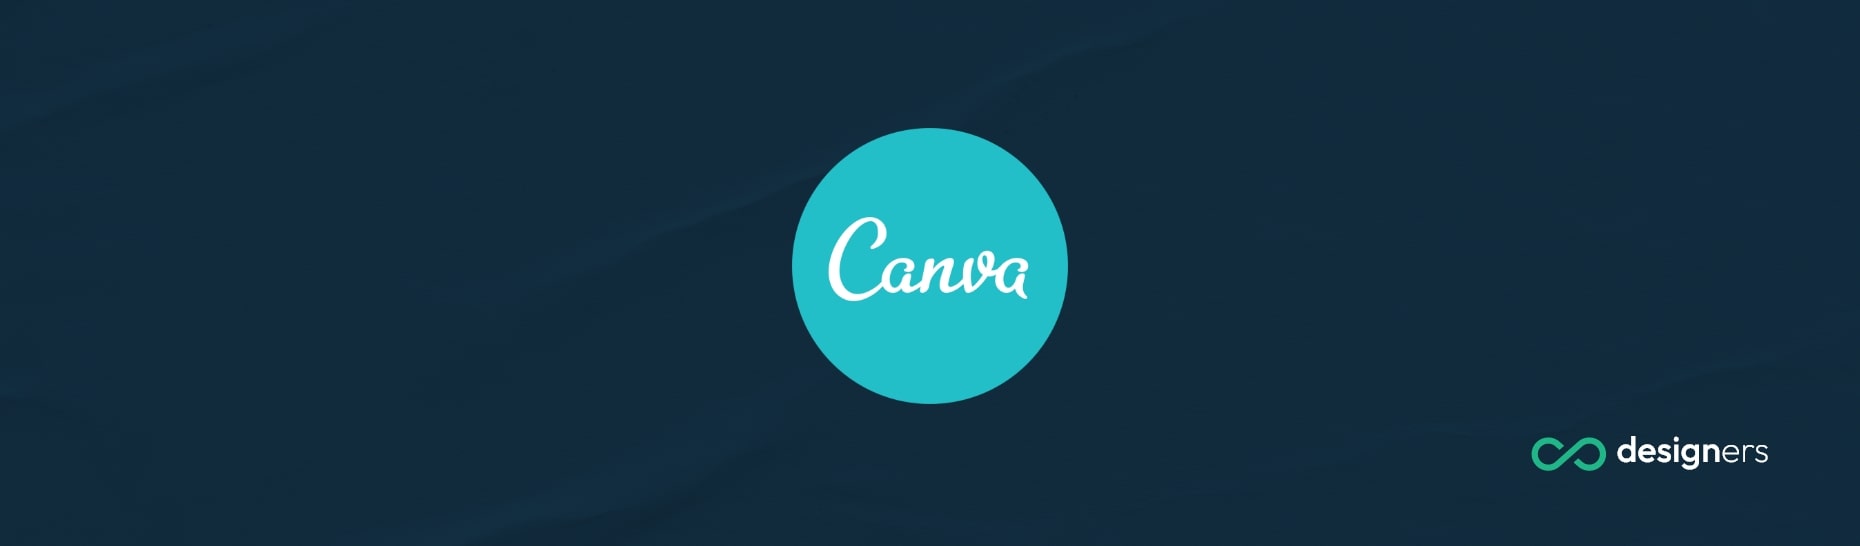 Does Canva Offer Discounts?